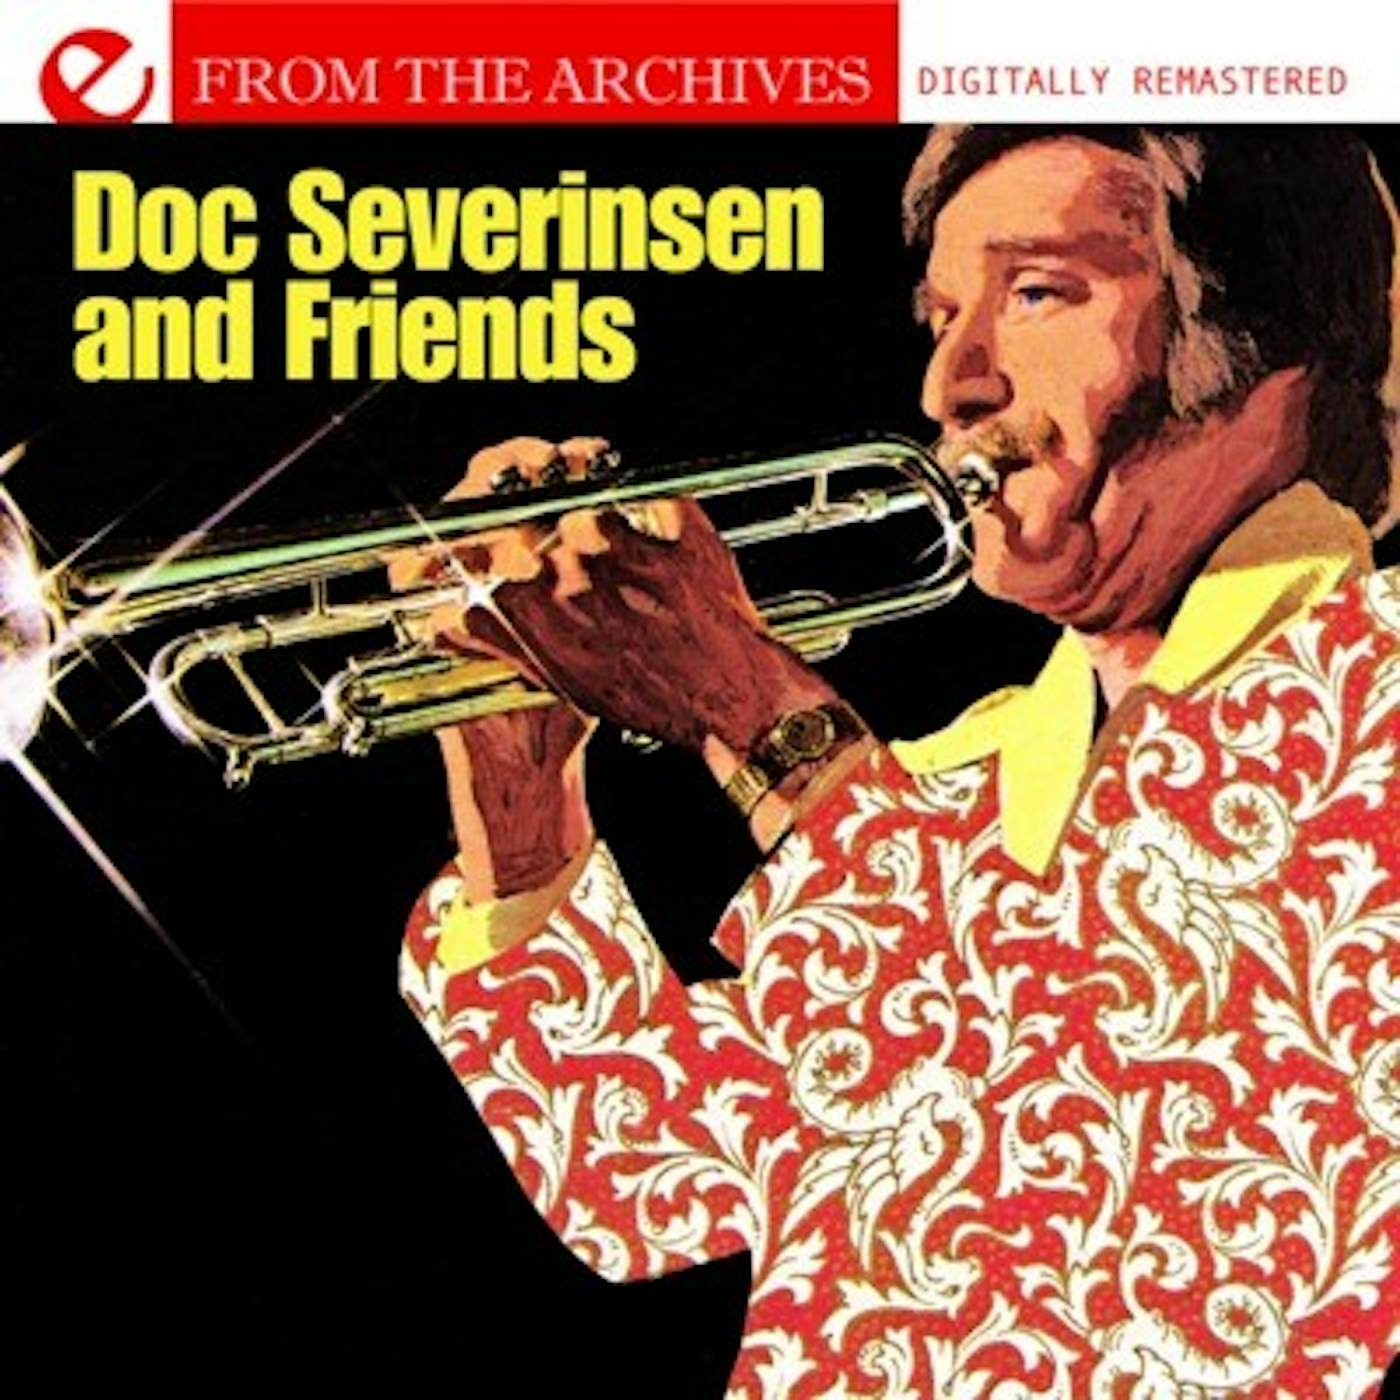 Doc Severinsen FROM THE ARCHIVES CD